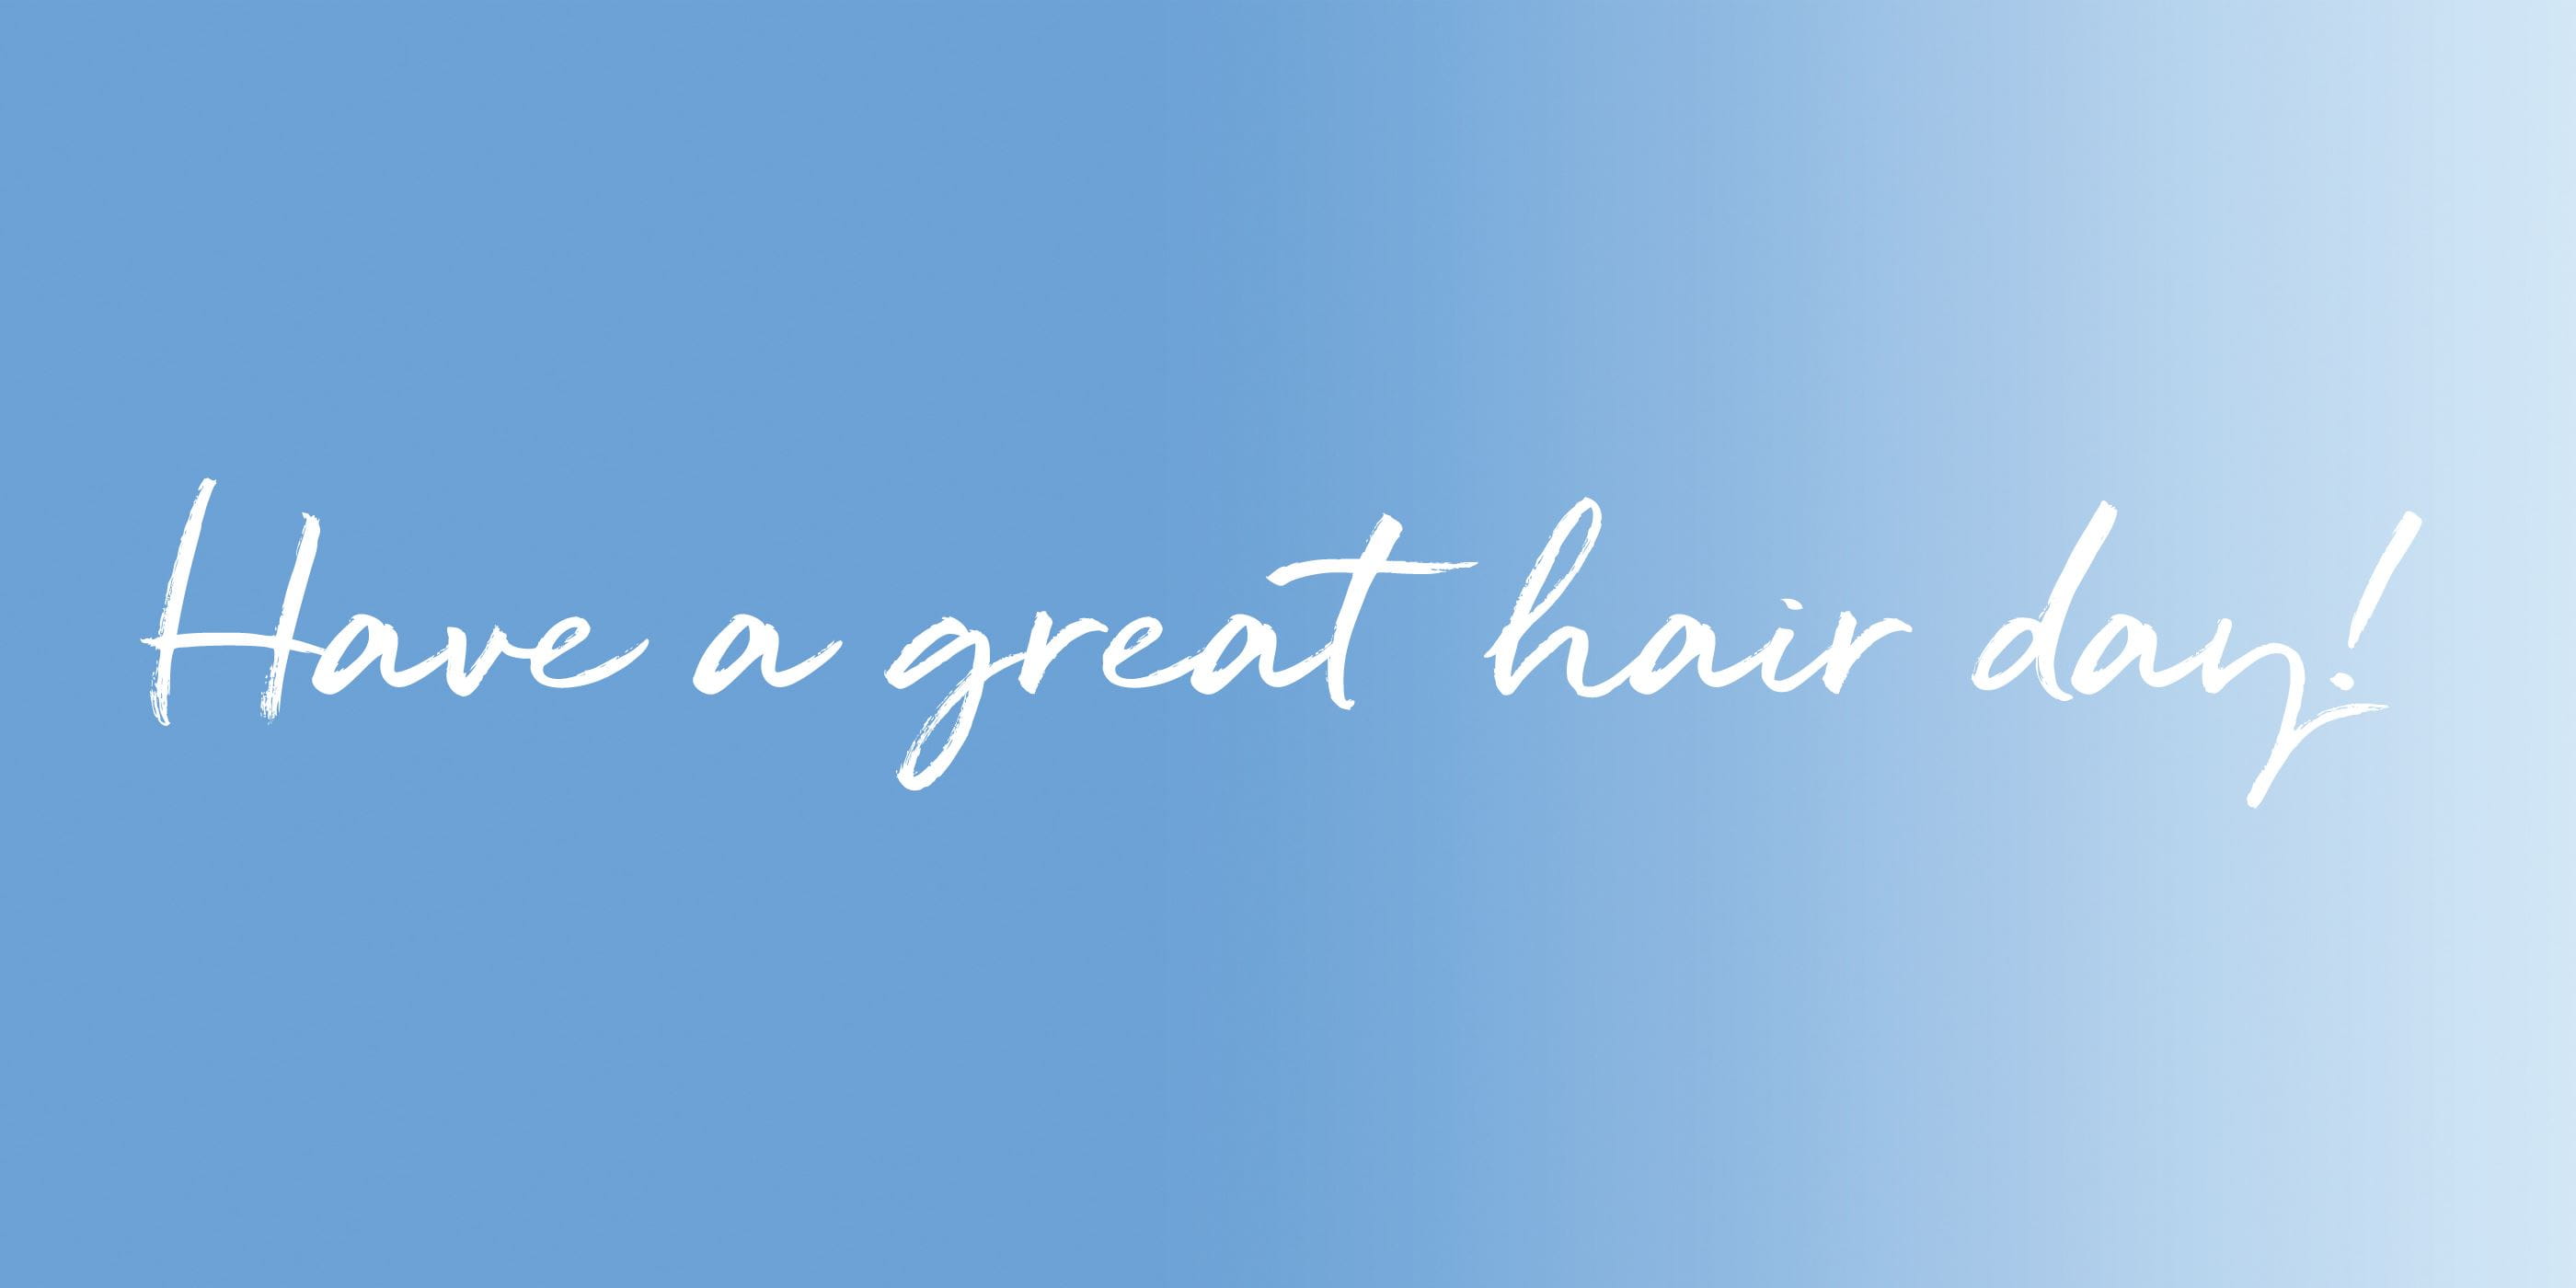 Have a great hairday!